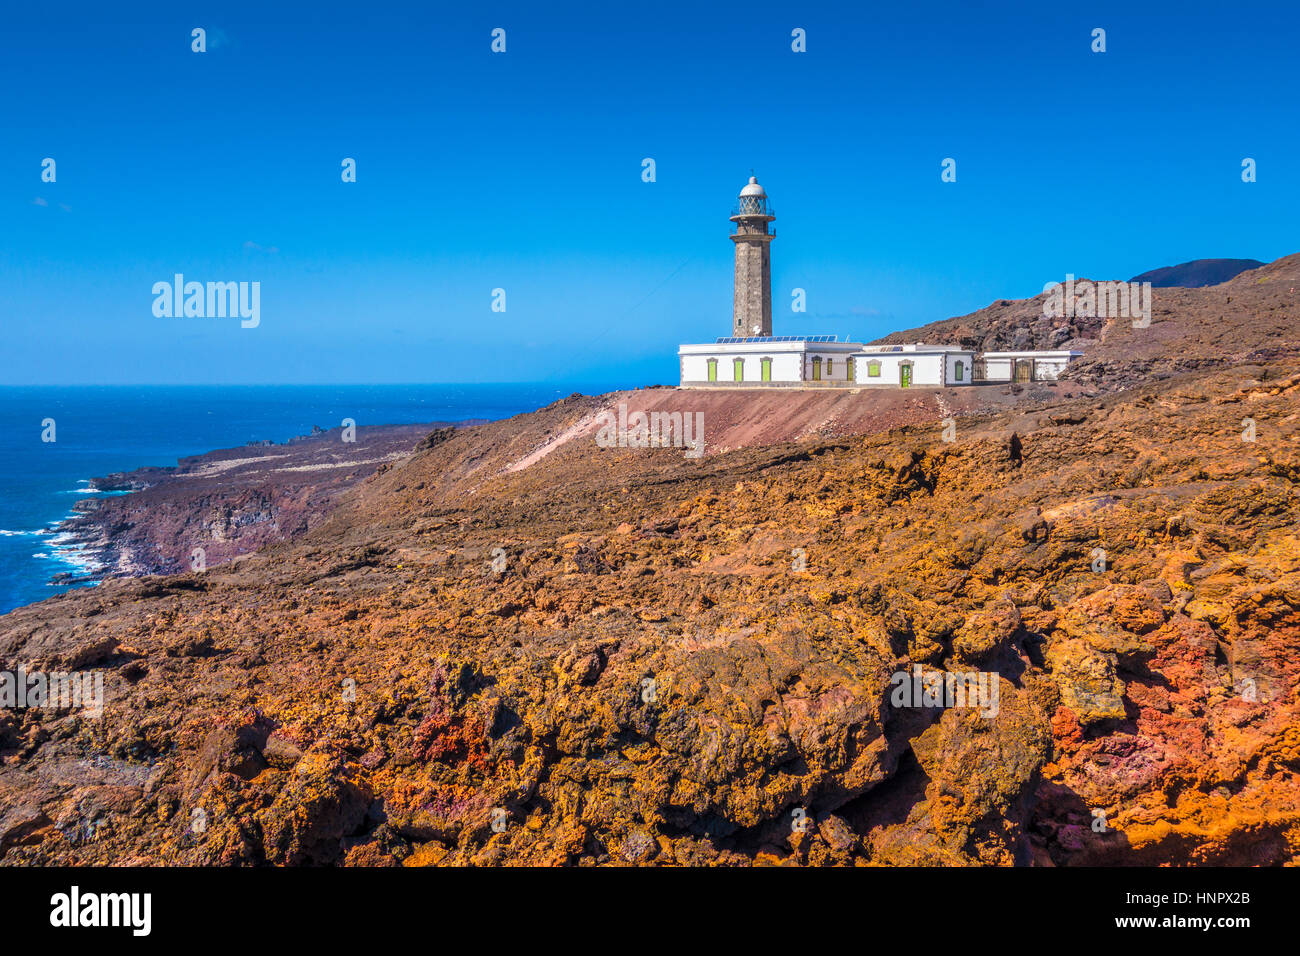 Beautiful view of famous El Faro de Punta Orchilla lighthouse with red volcanic scenery and wide open sea on a sunny day, El Hierro, Canary Islands Stock Photo